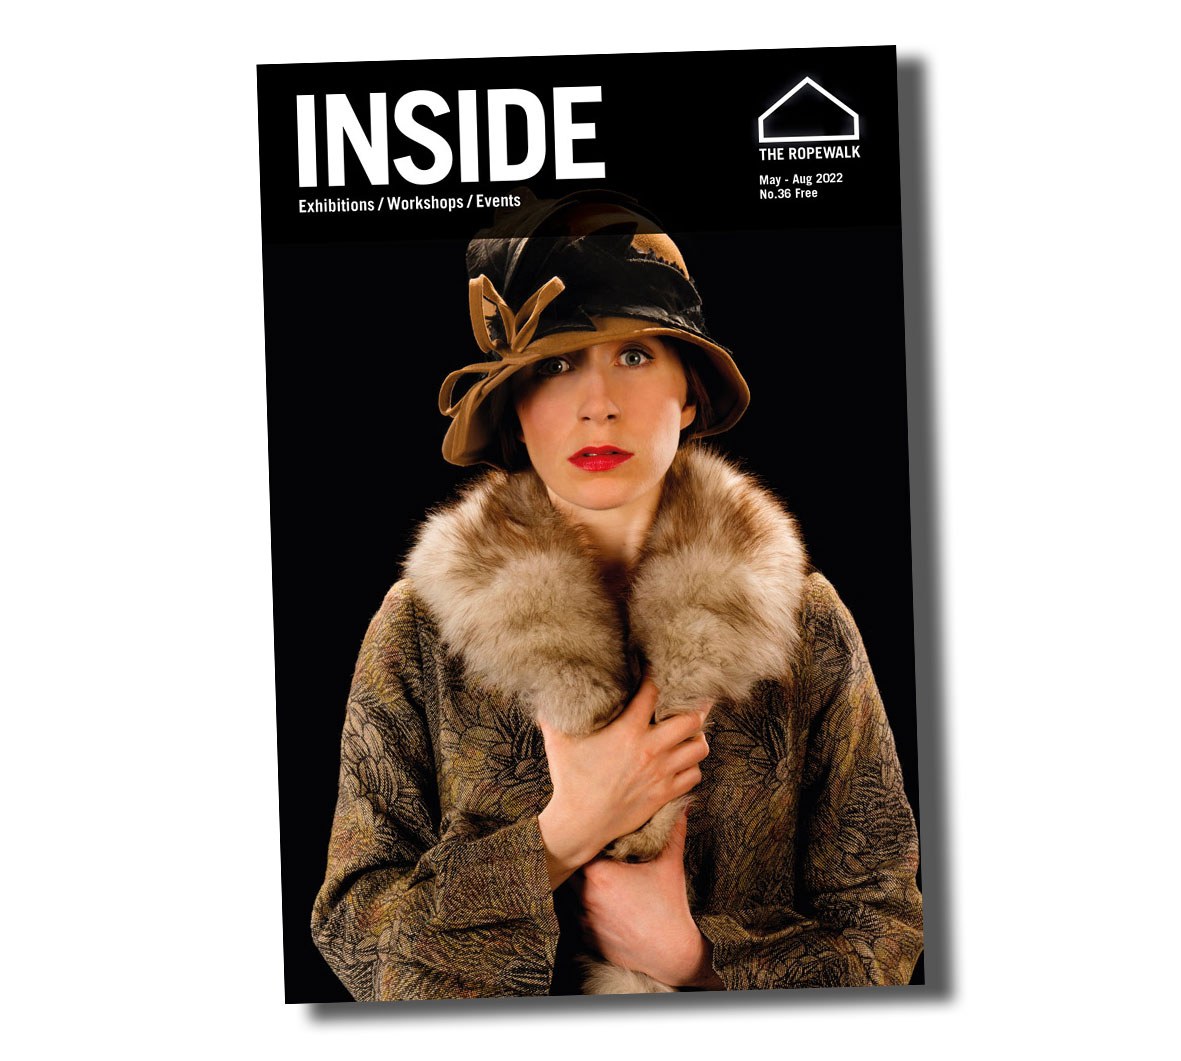 Inside - May - August 2022